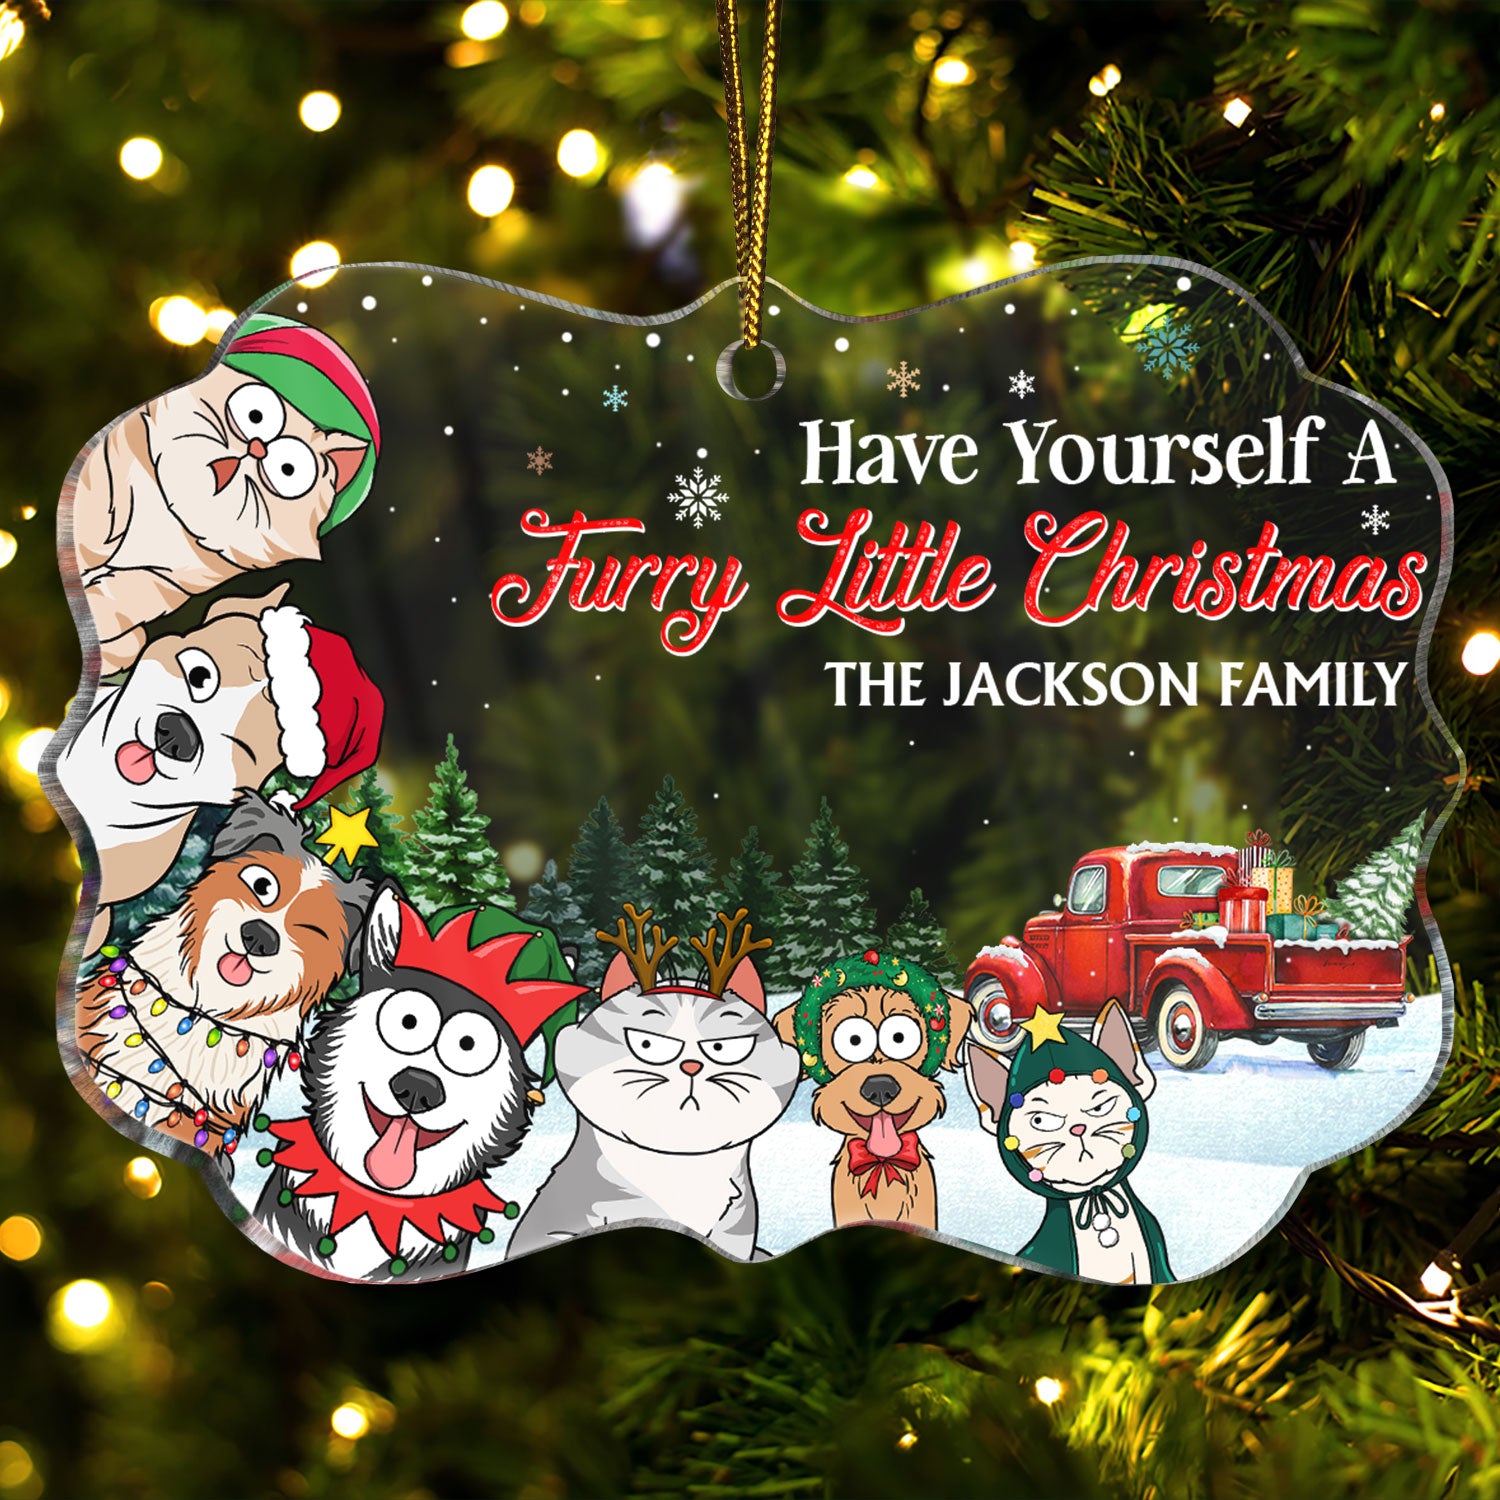 Have Yourself A Furry Little Christmas - Christmas Gift For Dog, Cat, Pet Lovers - Personalized Medallion Acrylic Ornament